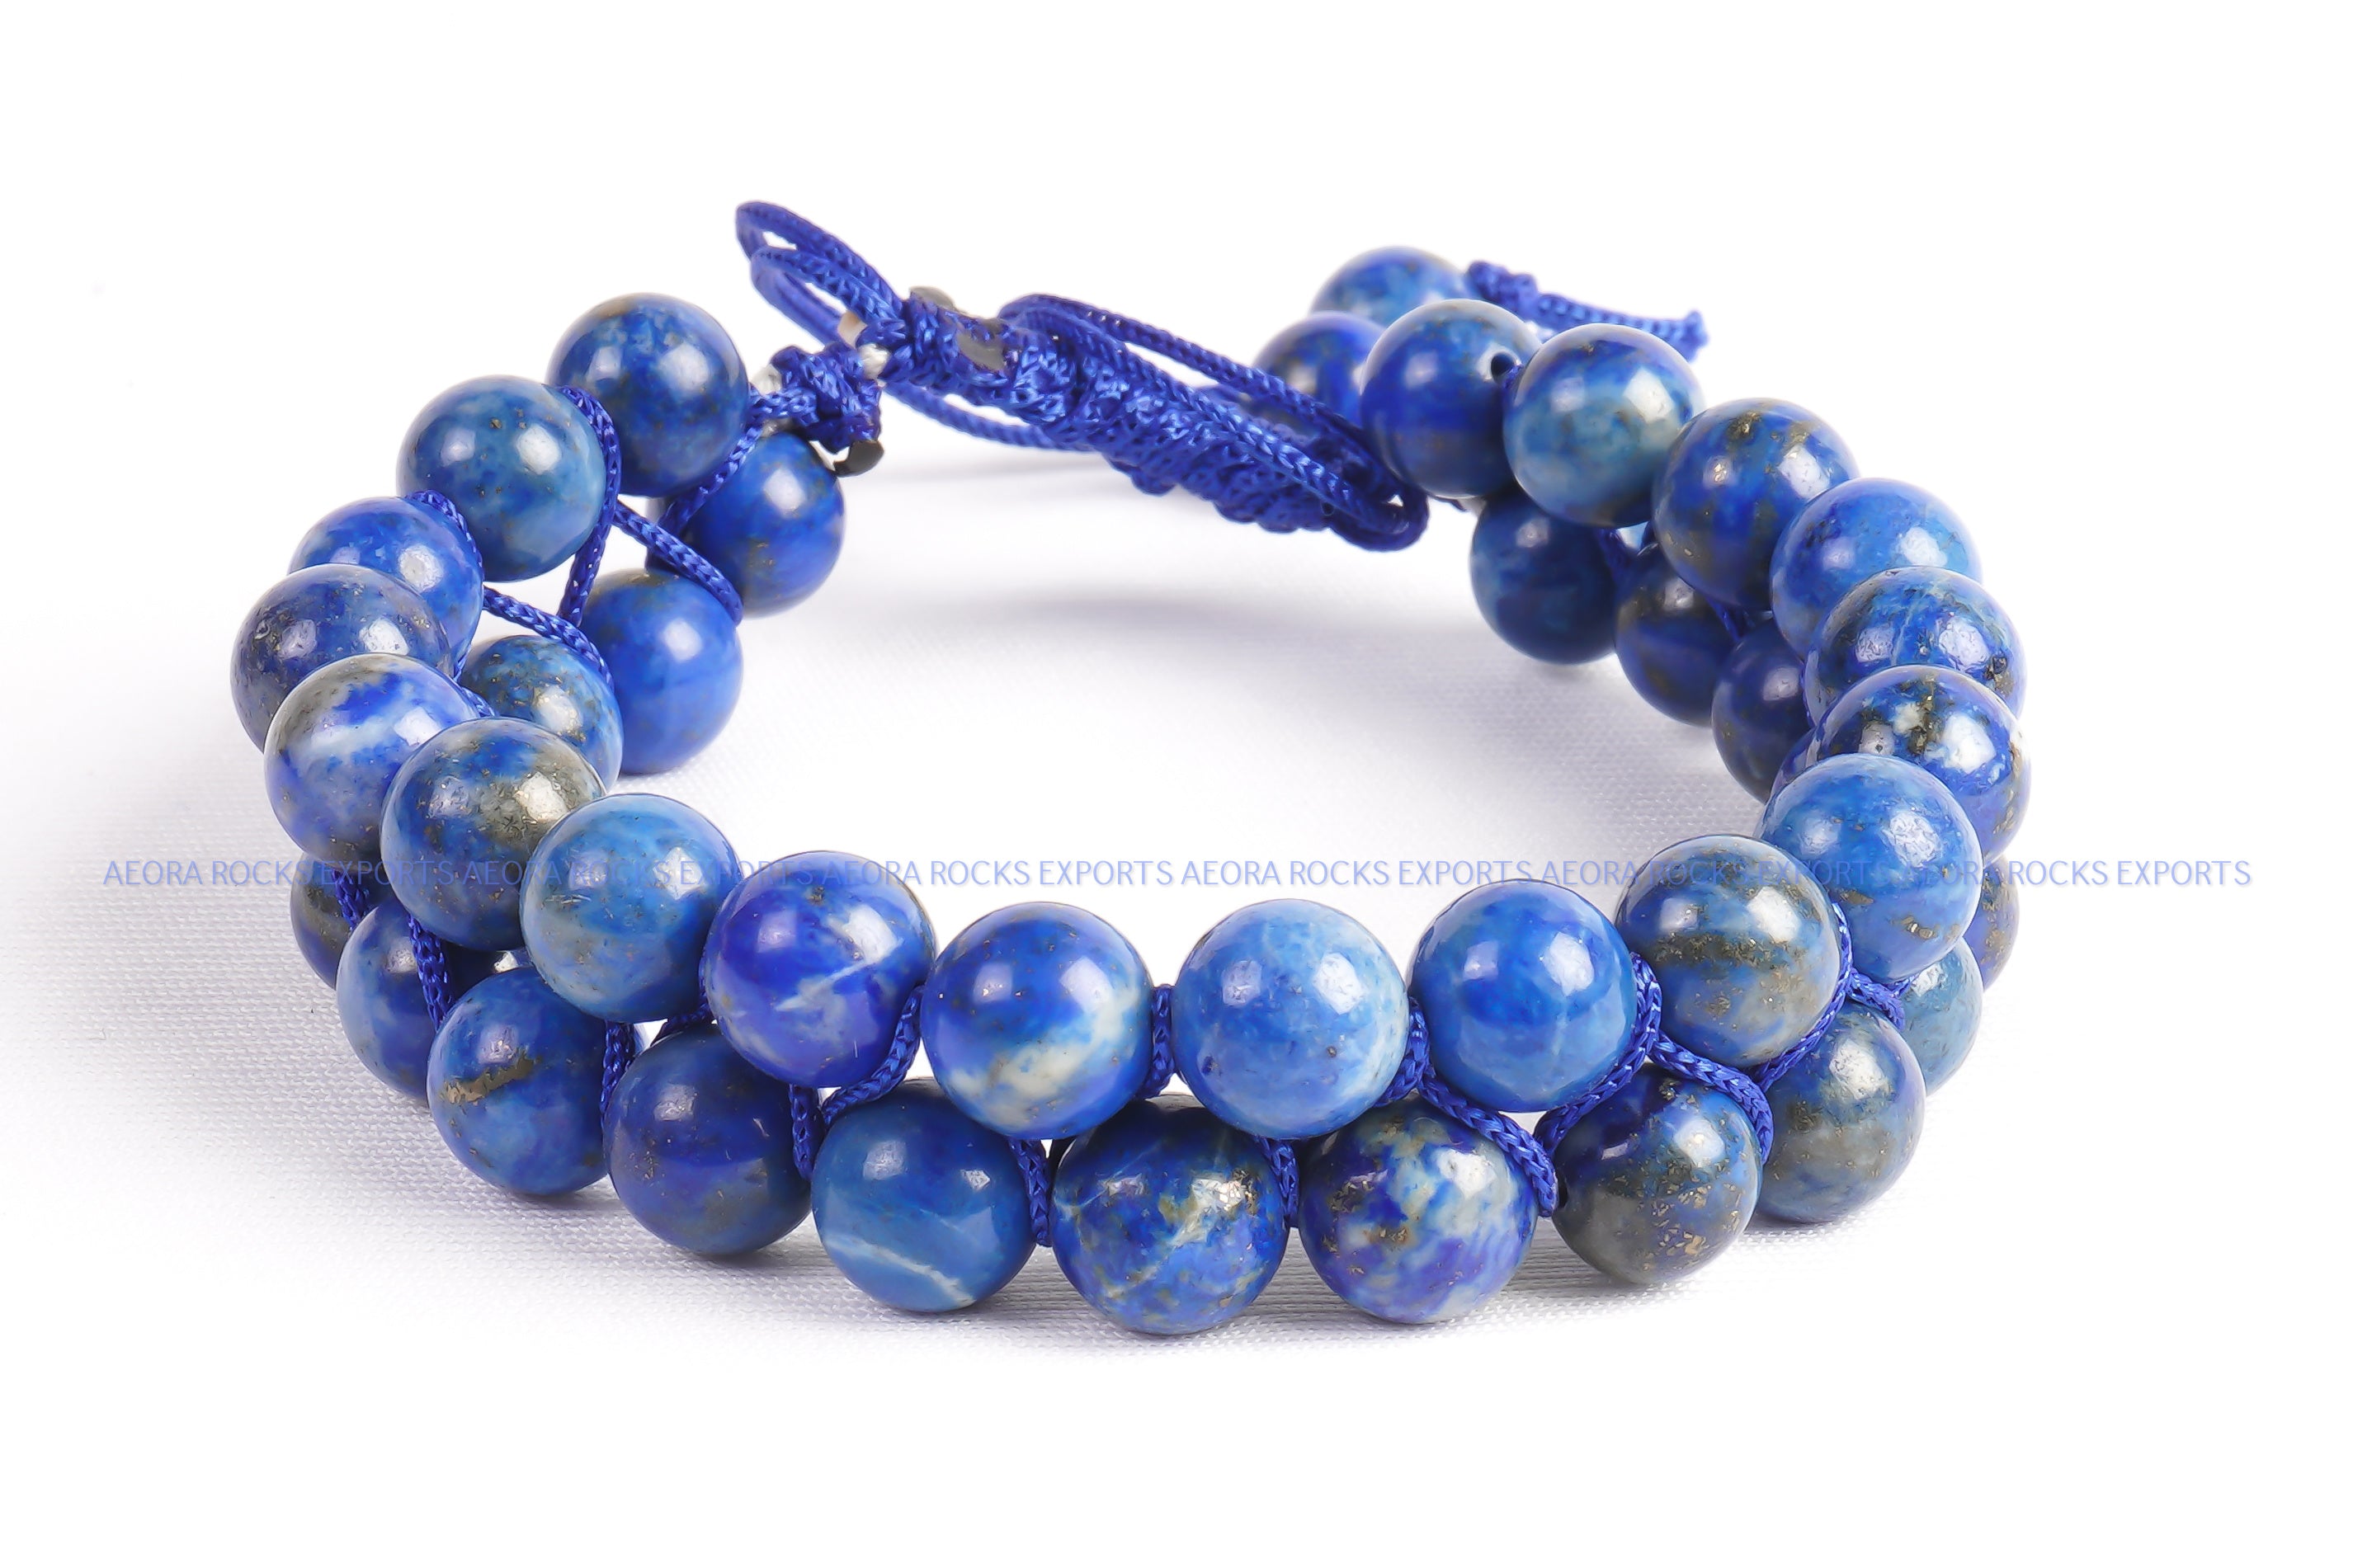 Opalite and Lapis Lazuli for Stress and Anxiety Relief – Rock My Zen